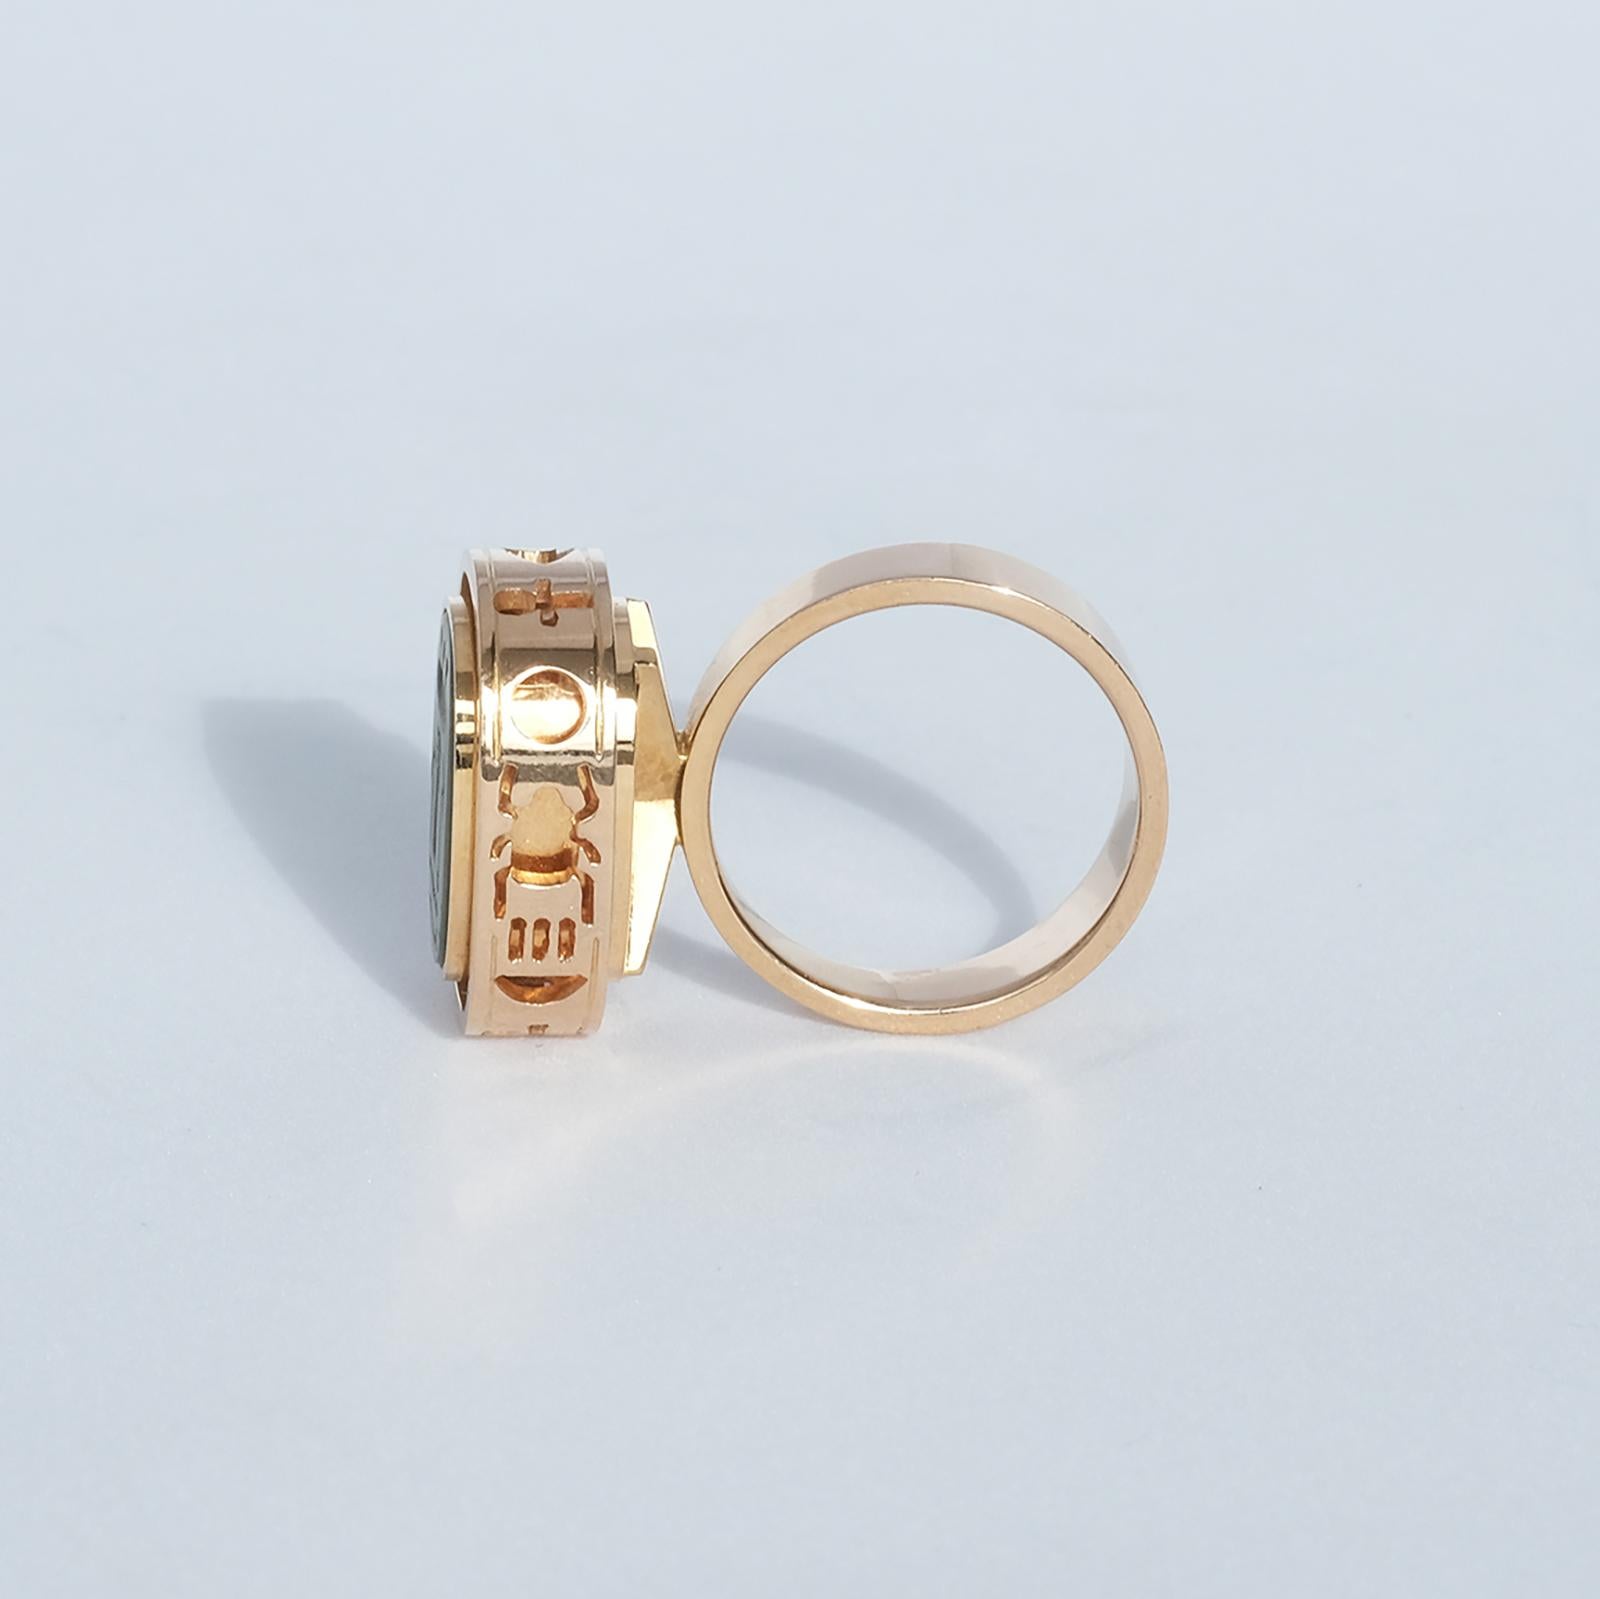 18 K Gold Ring with an Unusual Egyptian Design, Swedish Made 1978 For Sale 4